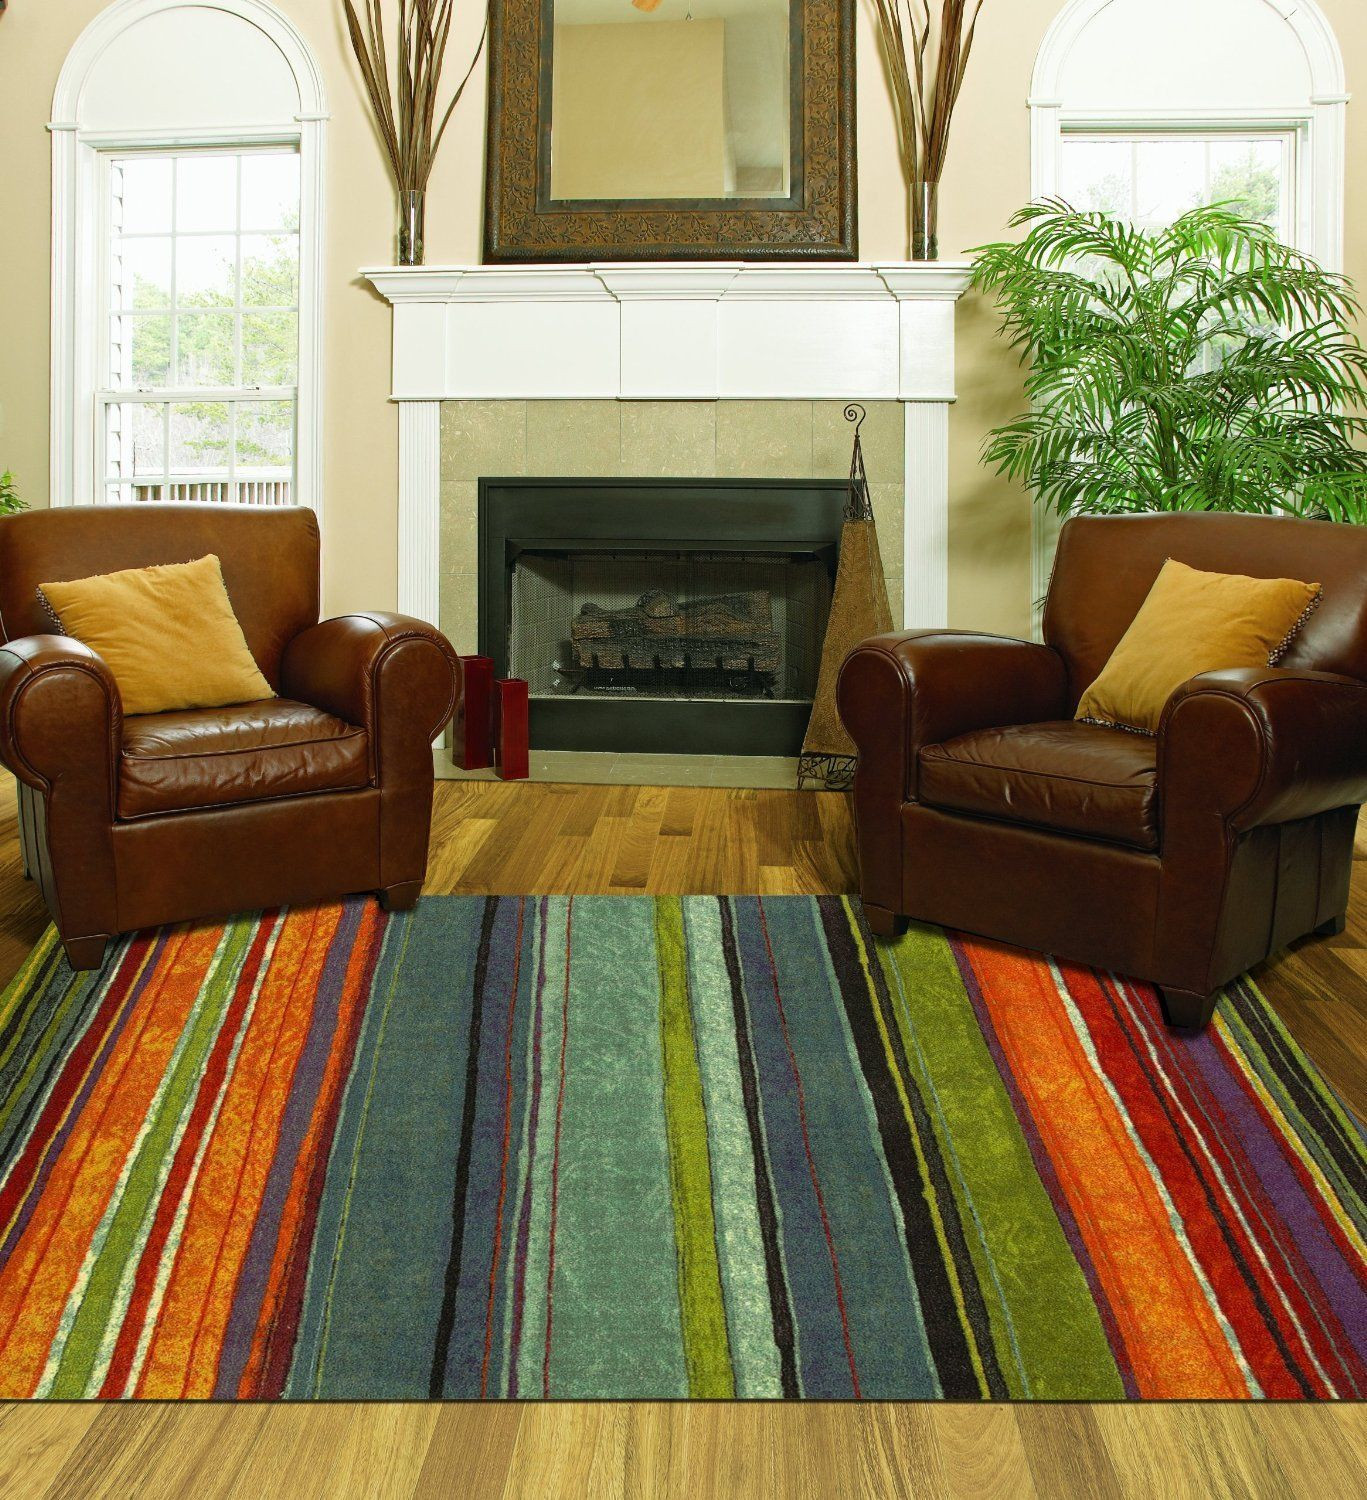 Rug Sizes For Living Room
 Area Rug Colorful 8x10 Living Room Size Carpet Home